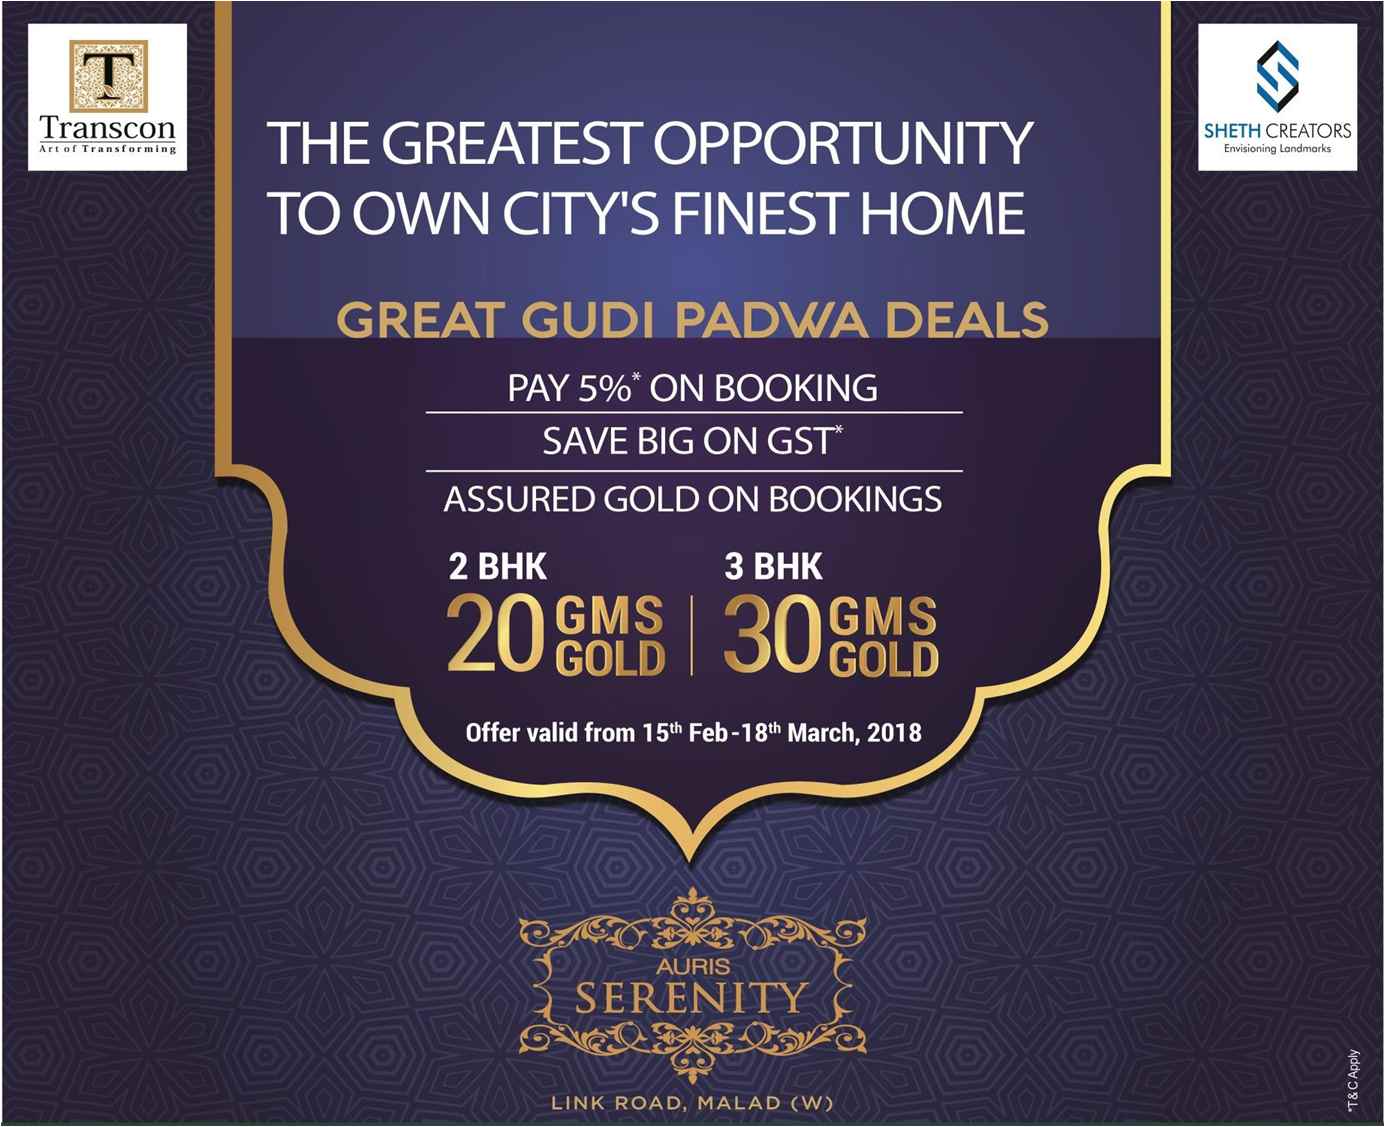 The greatest opportunity to own city's finest home during Gudi Padwa deals at Sheth Auris Serenity, Mumbai